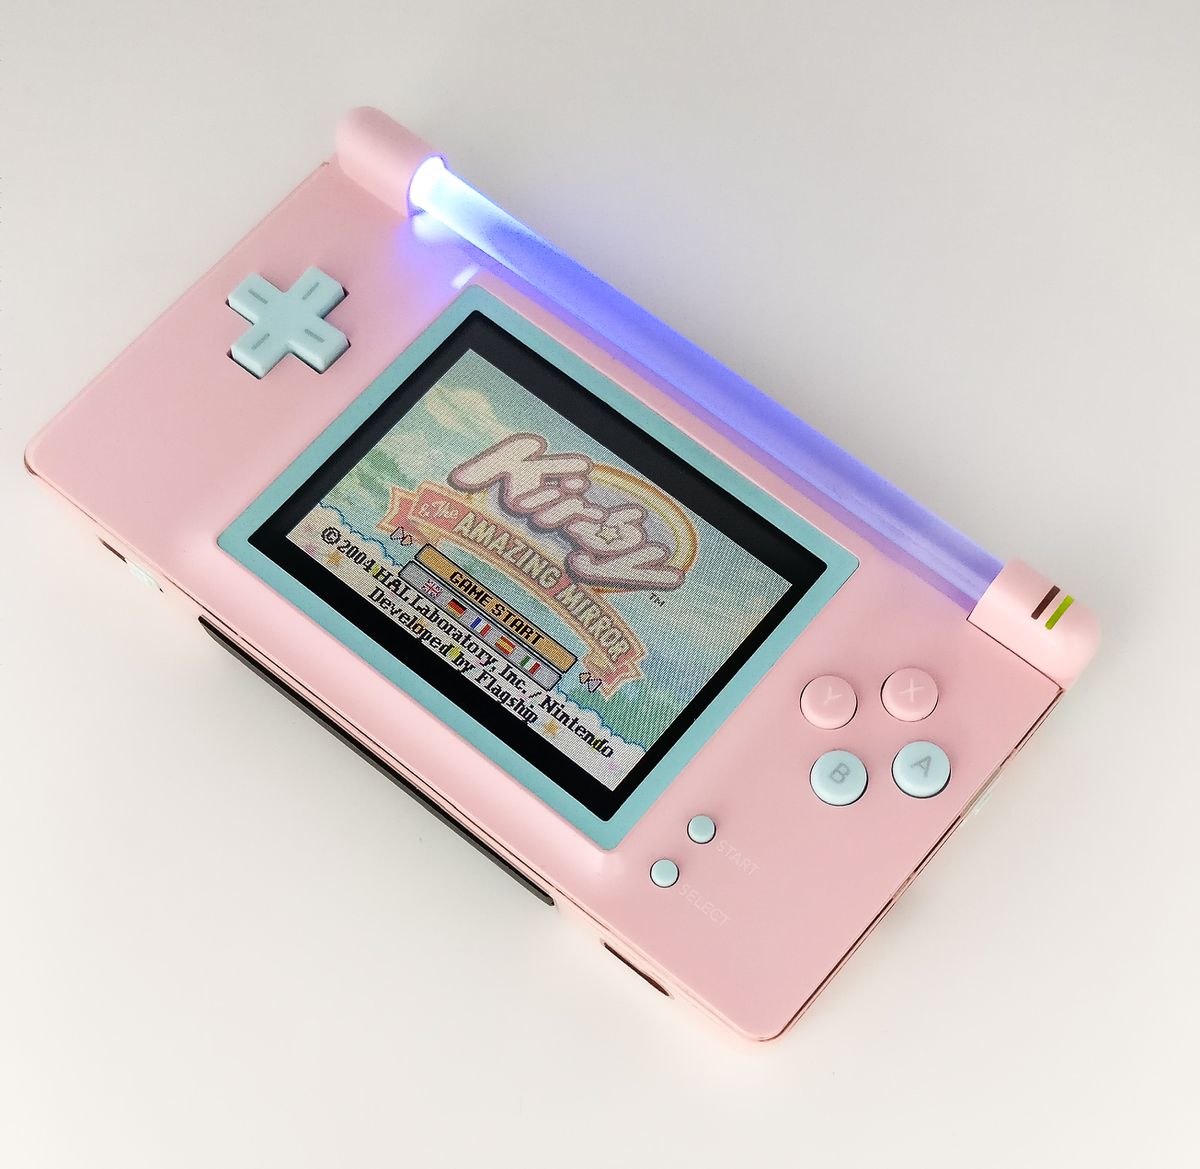 Mashable On Twitter This Nintendo Ds Lite Mod Is Absurdly